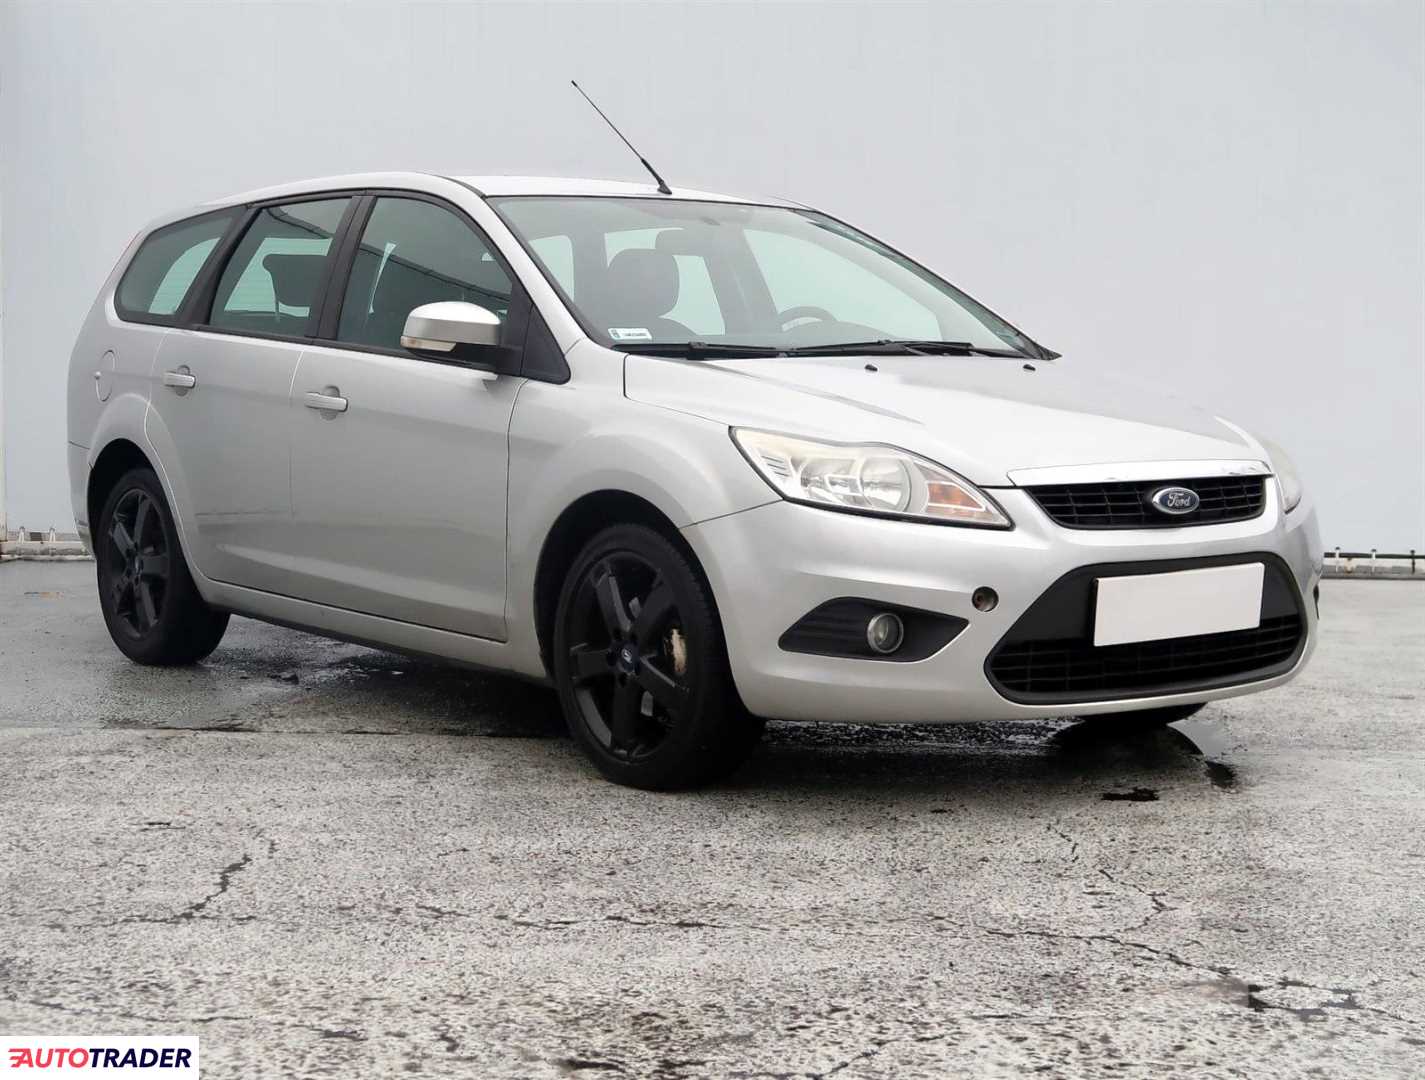 Ford Focus 2008 1.6 107 KM